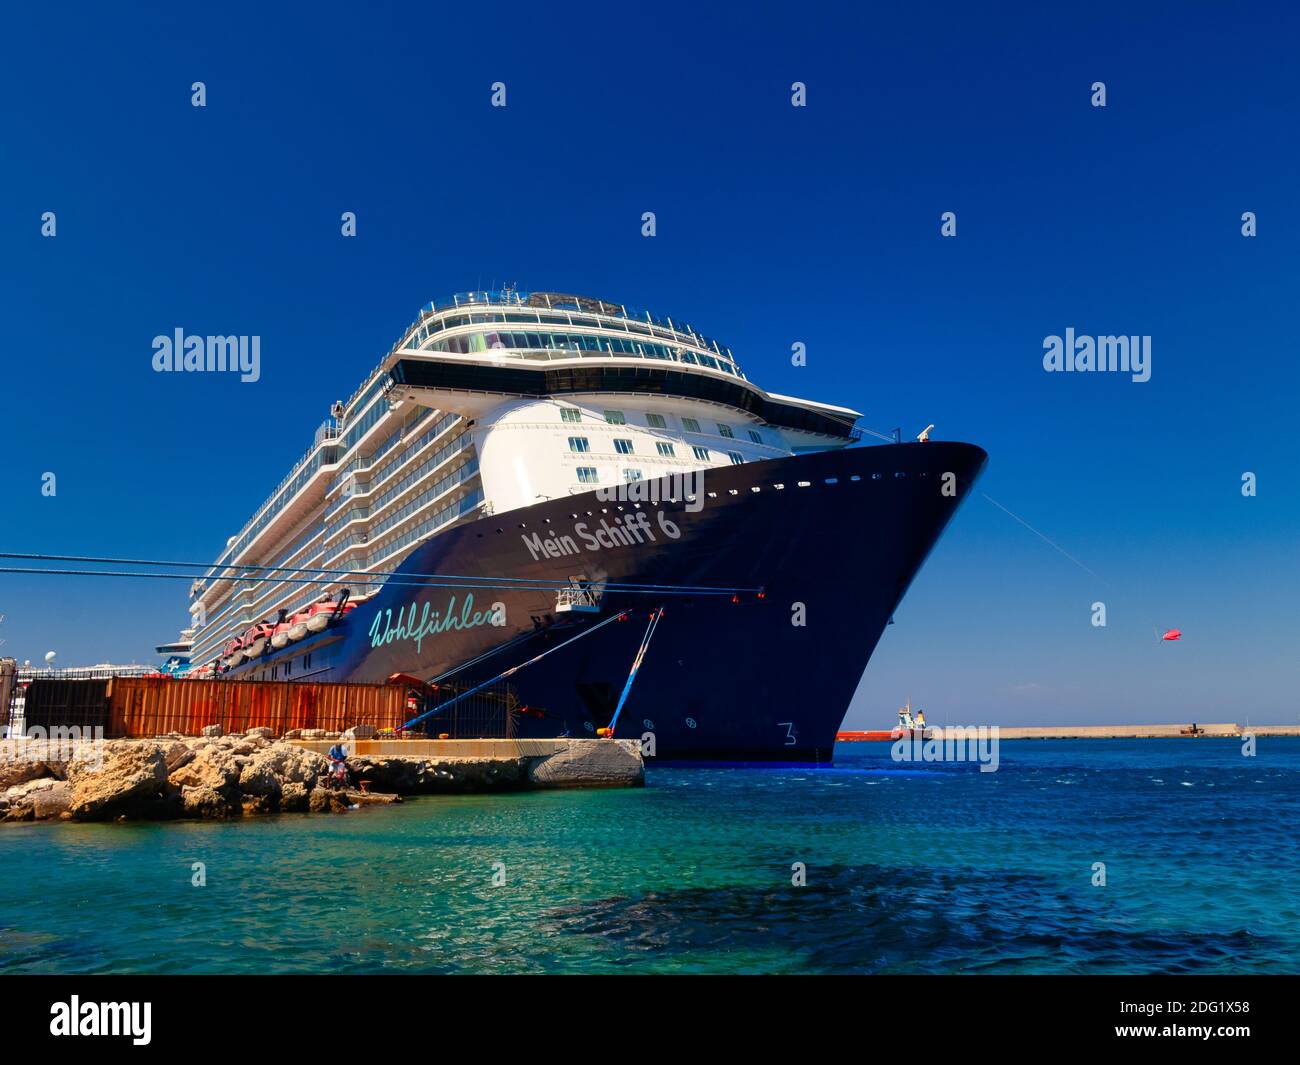 Rhodes, Greece - July 3, 2020 - The ship 'Mein Schiff 6' of the German shipping company 'TUI' in the port of Rhodes Stock Photo